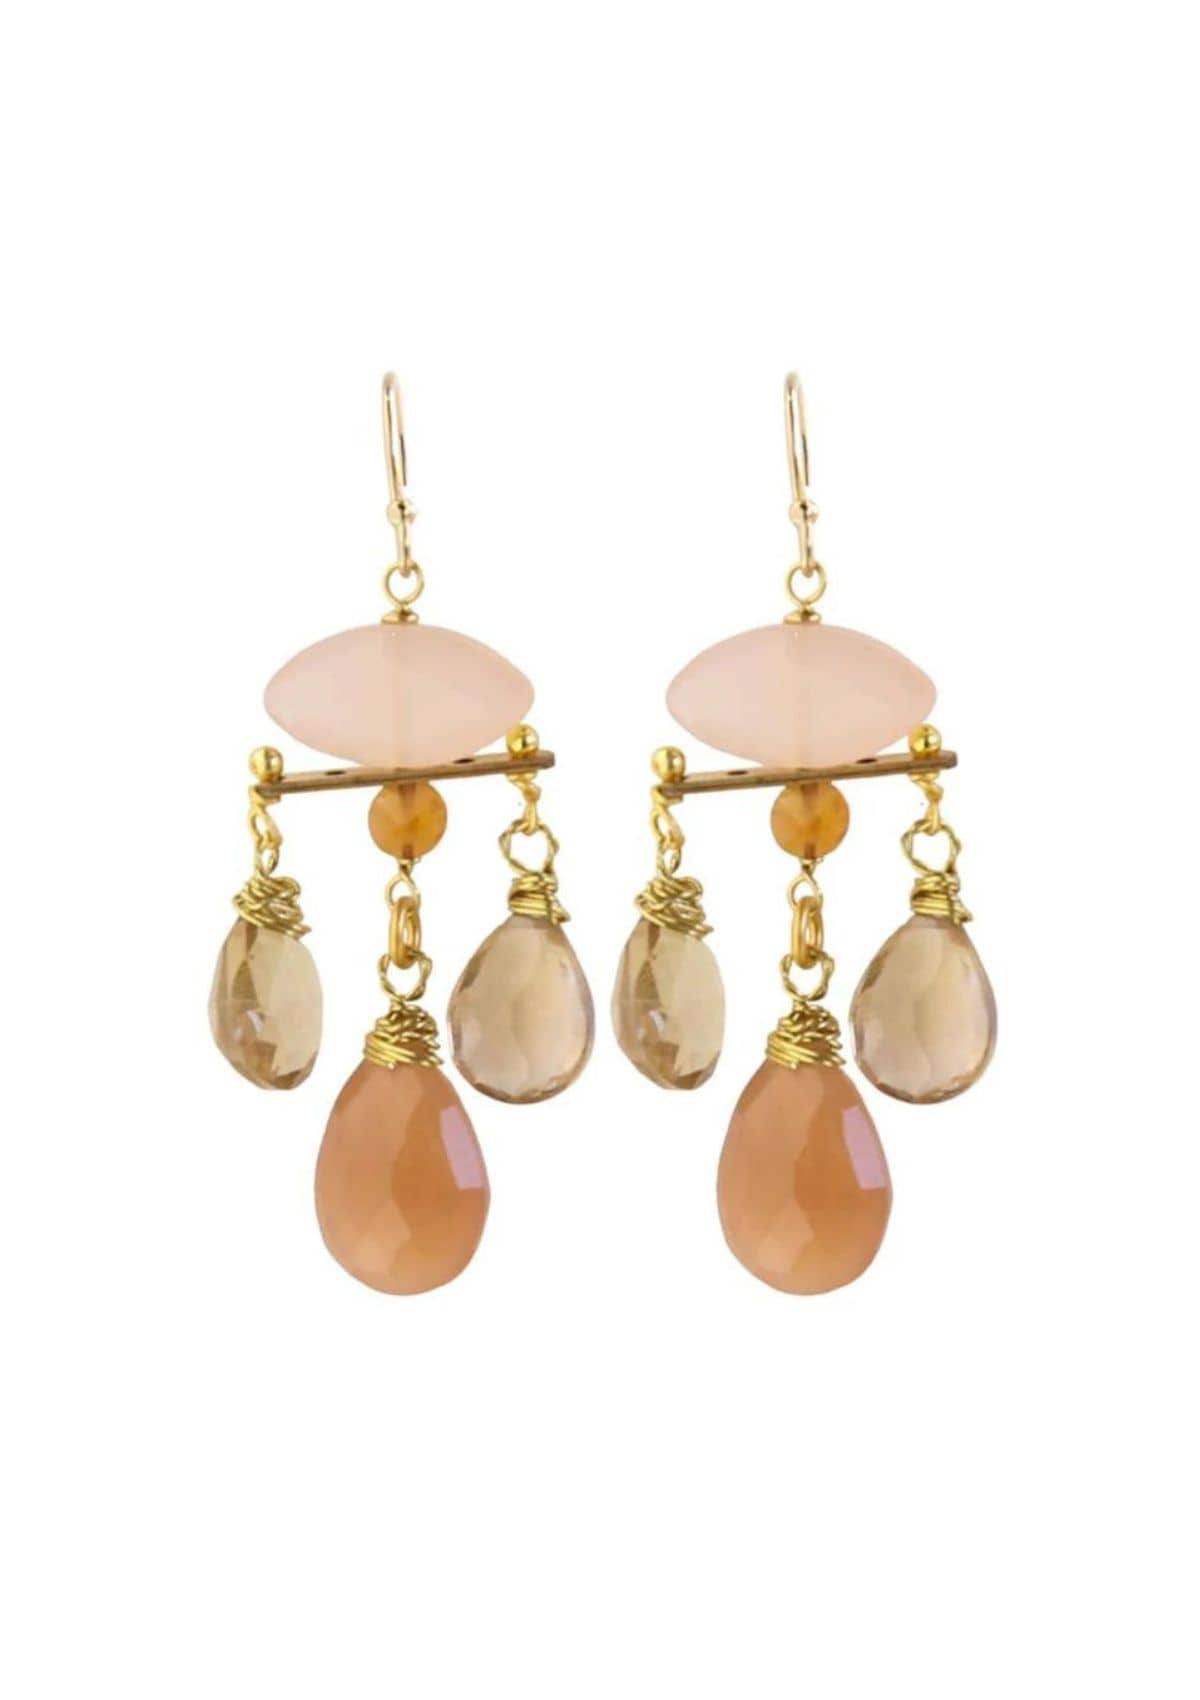 Sunniva Earrings - Pale Pink -Catherine Page- Ruby Jane-